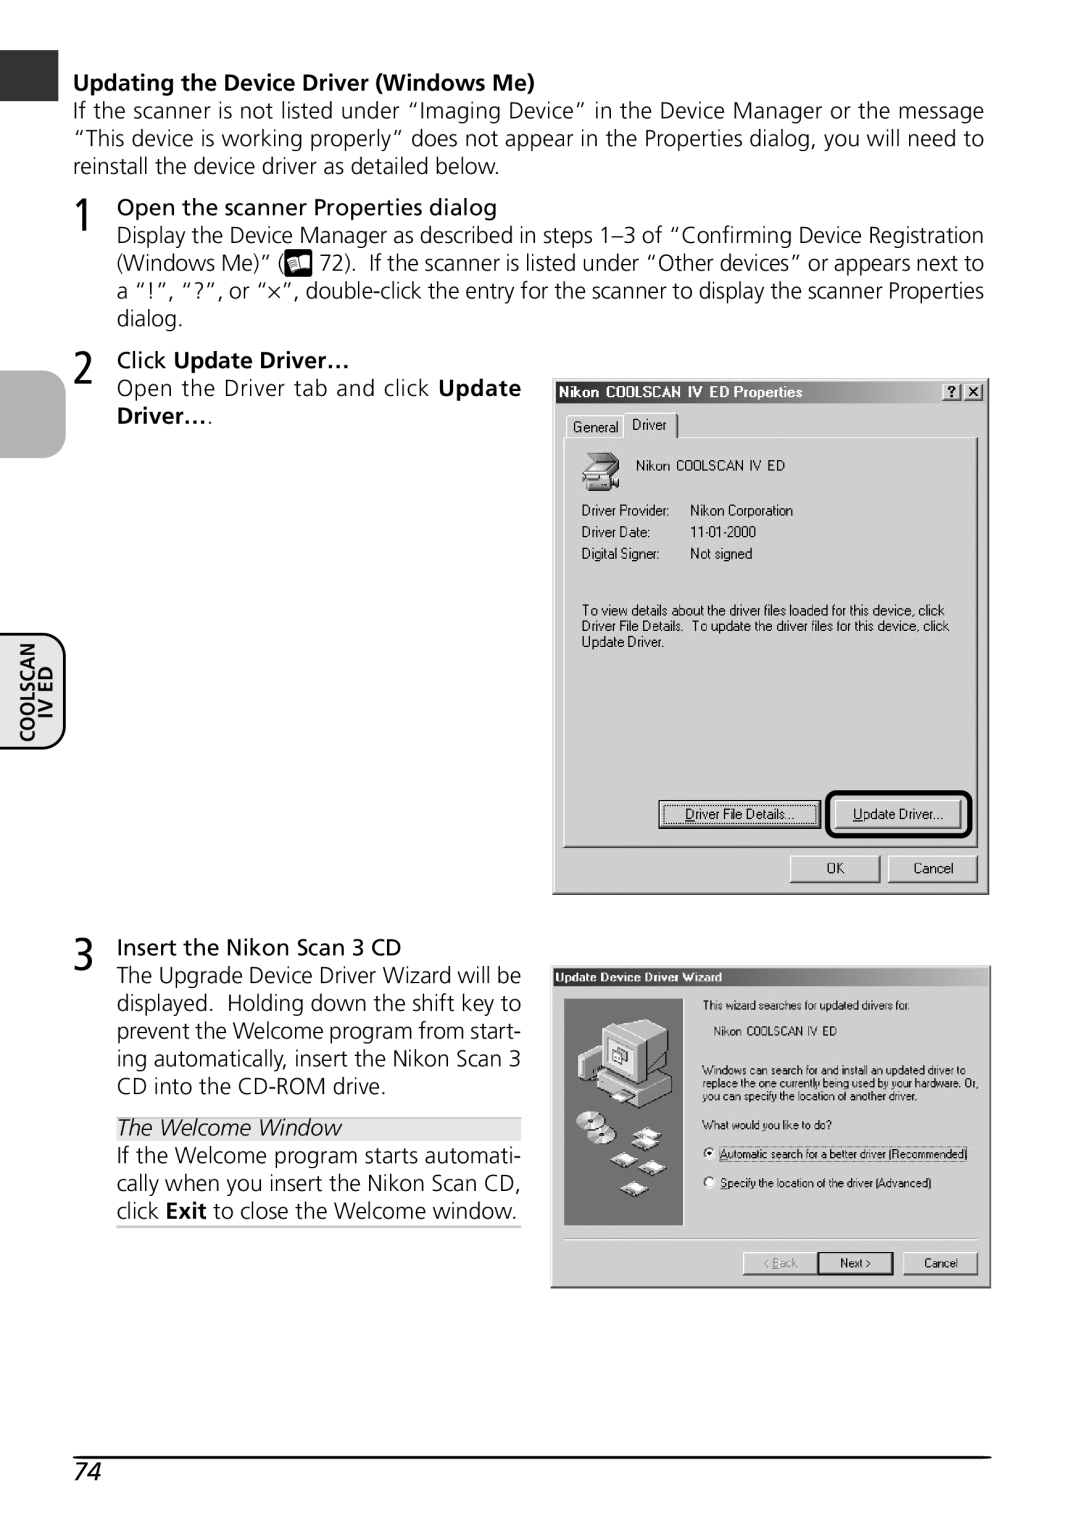 Nikon LS4000 user manual Updating the Device Driver Windows Me, Click Update Driver… 